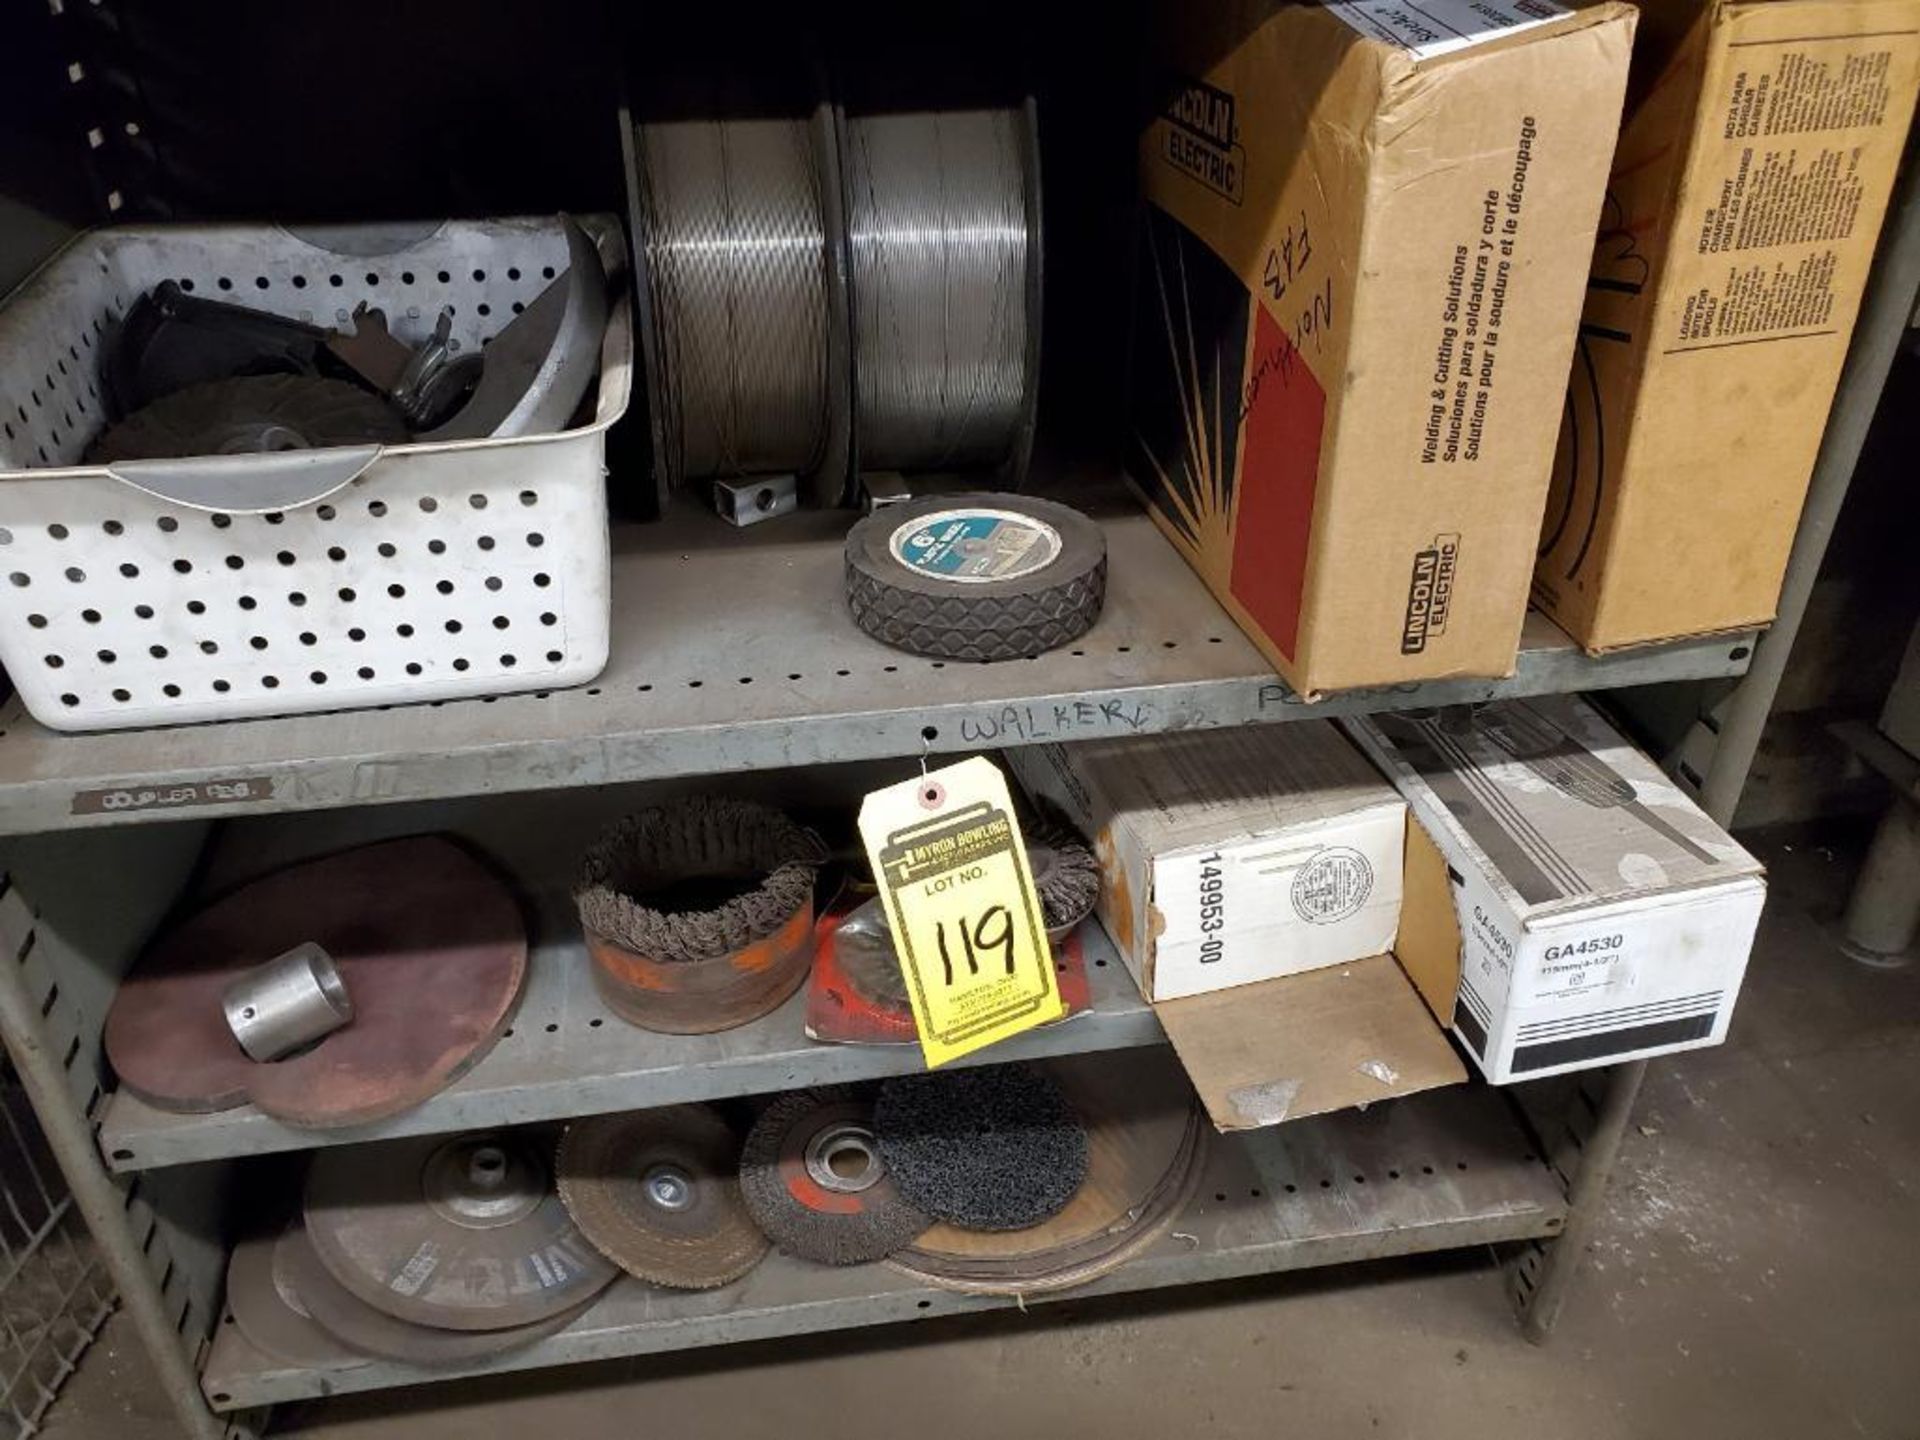 LOT OF WELDING SUPPLIES - PICLE1 TRACK WELDER, TORCH CUTTING HEADS, WELDING WIRE, ABRASIVES, STEEL C - Image 4 of 7